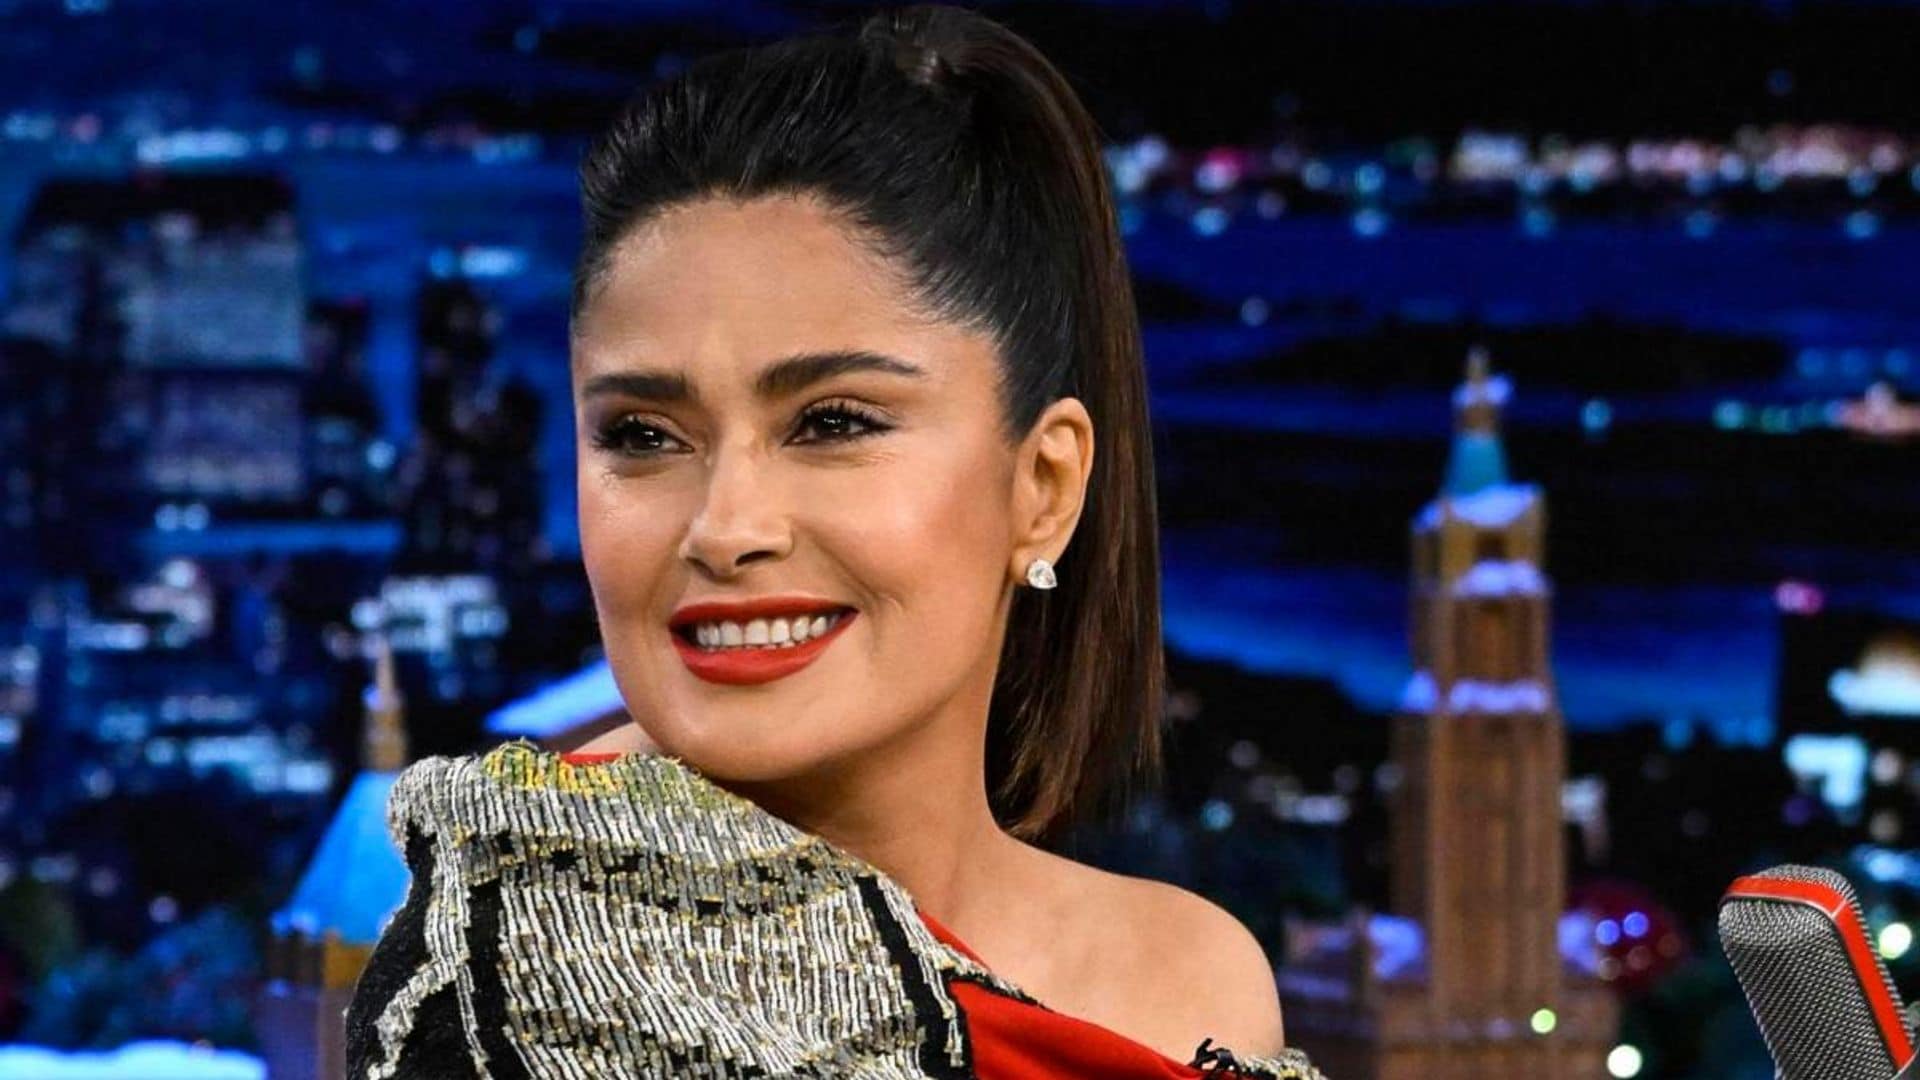 Salma Hayek Pinault recounts the hilarious time she pranked one of her friends during the Qatar World Cup